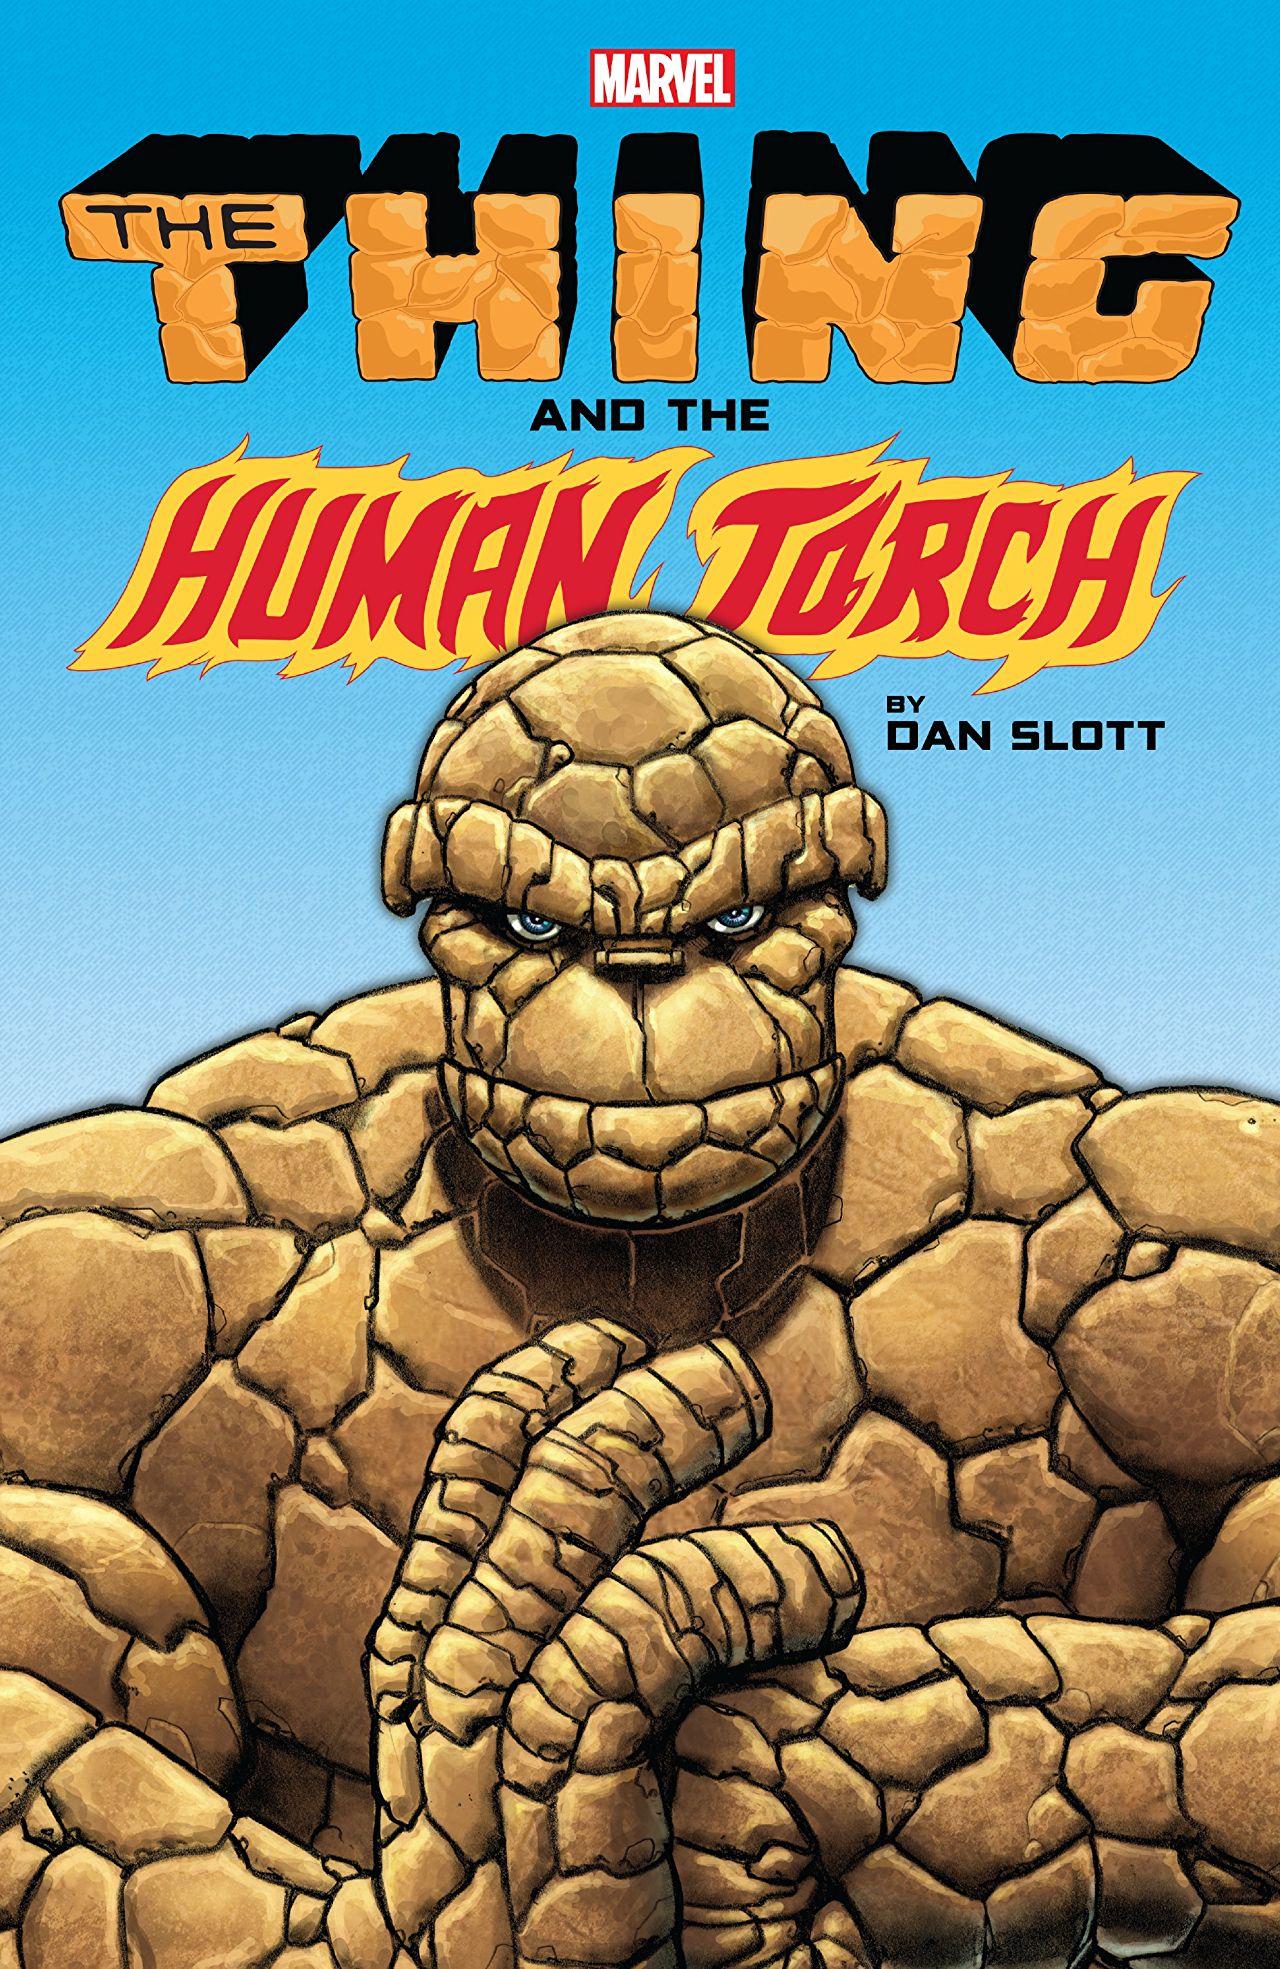 'The Thing & The Human Torch by Dan Slott' review: The Fantastic Four are in good hands